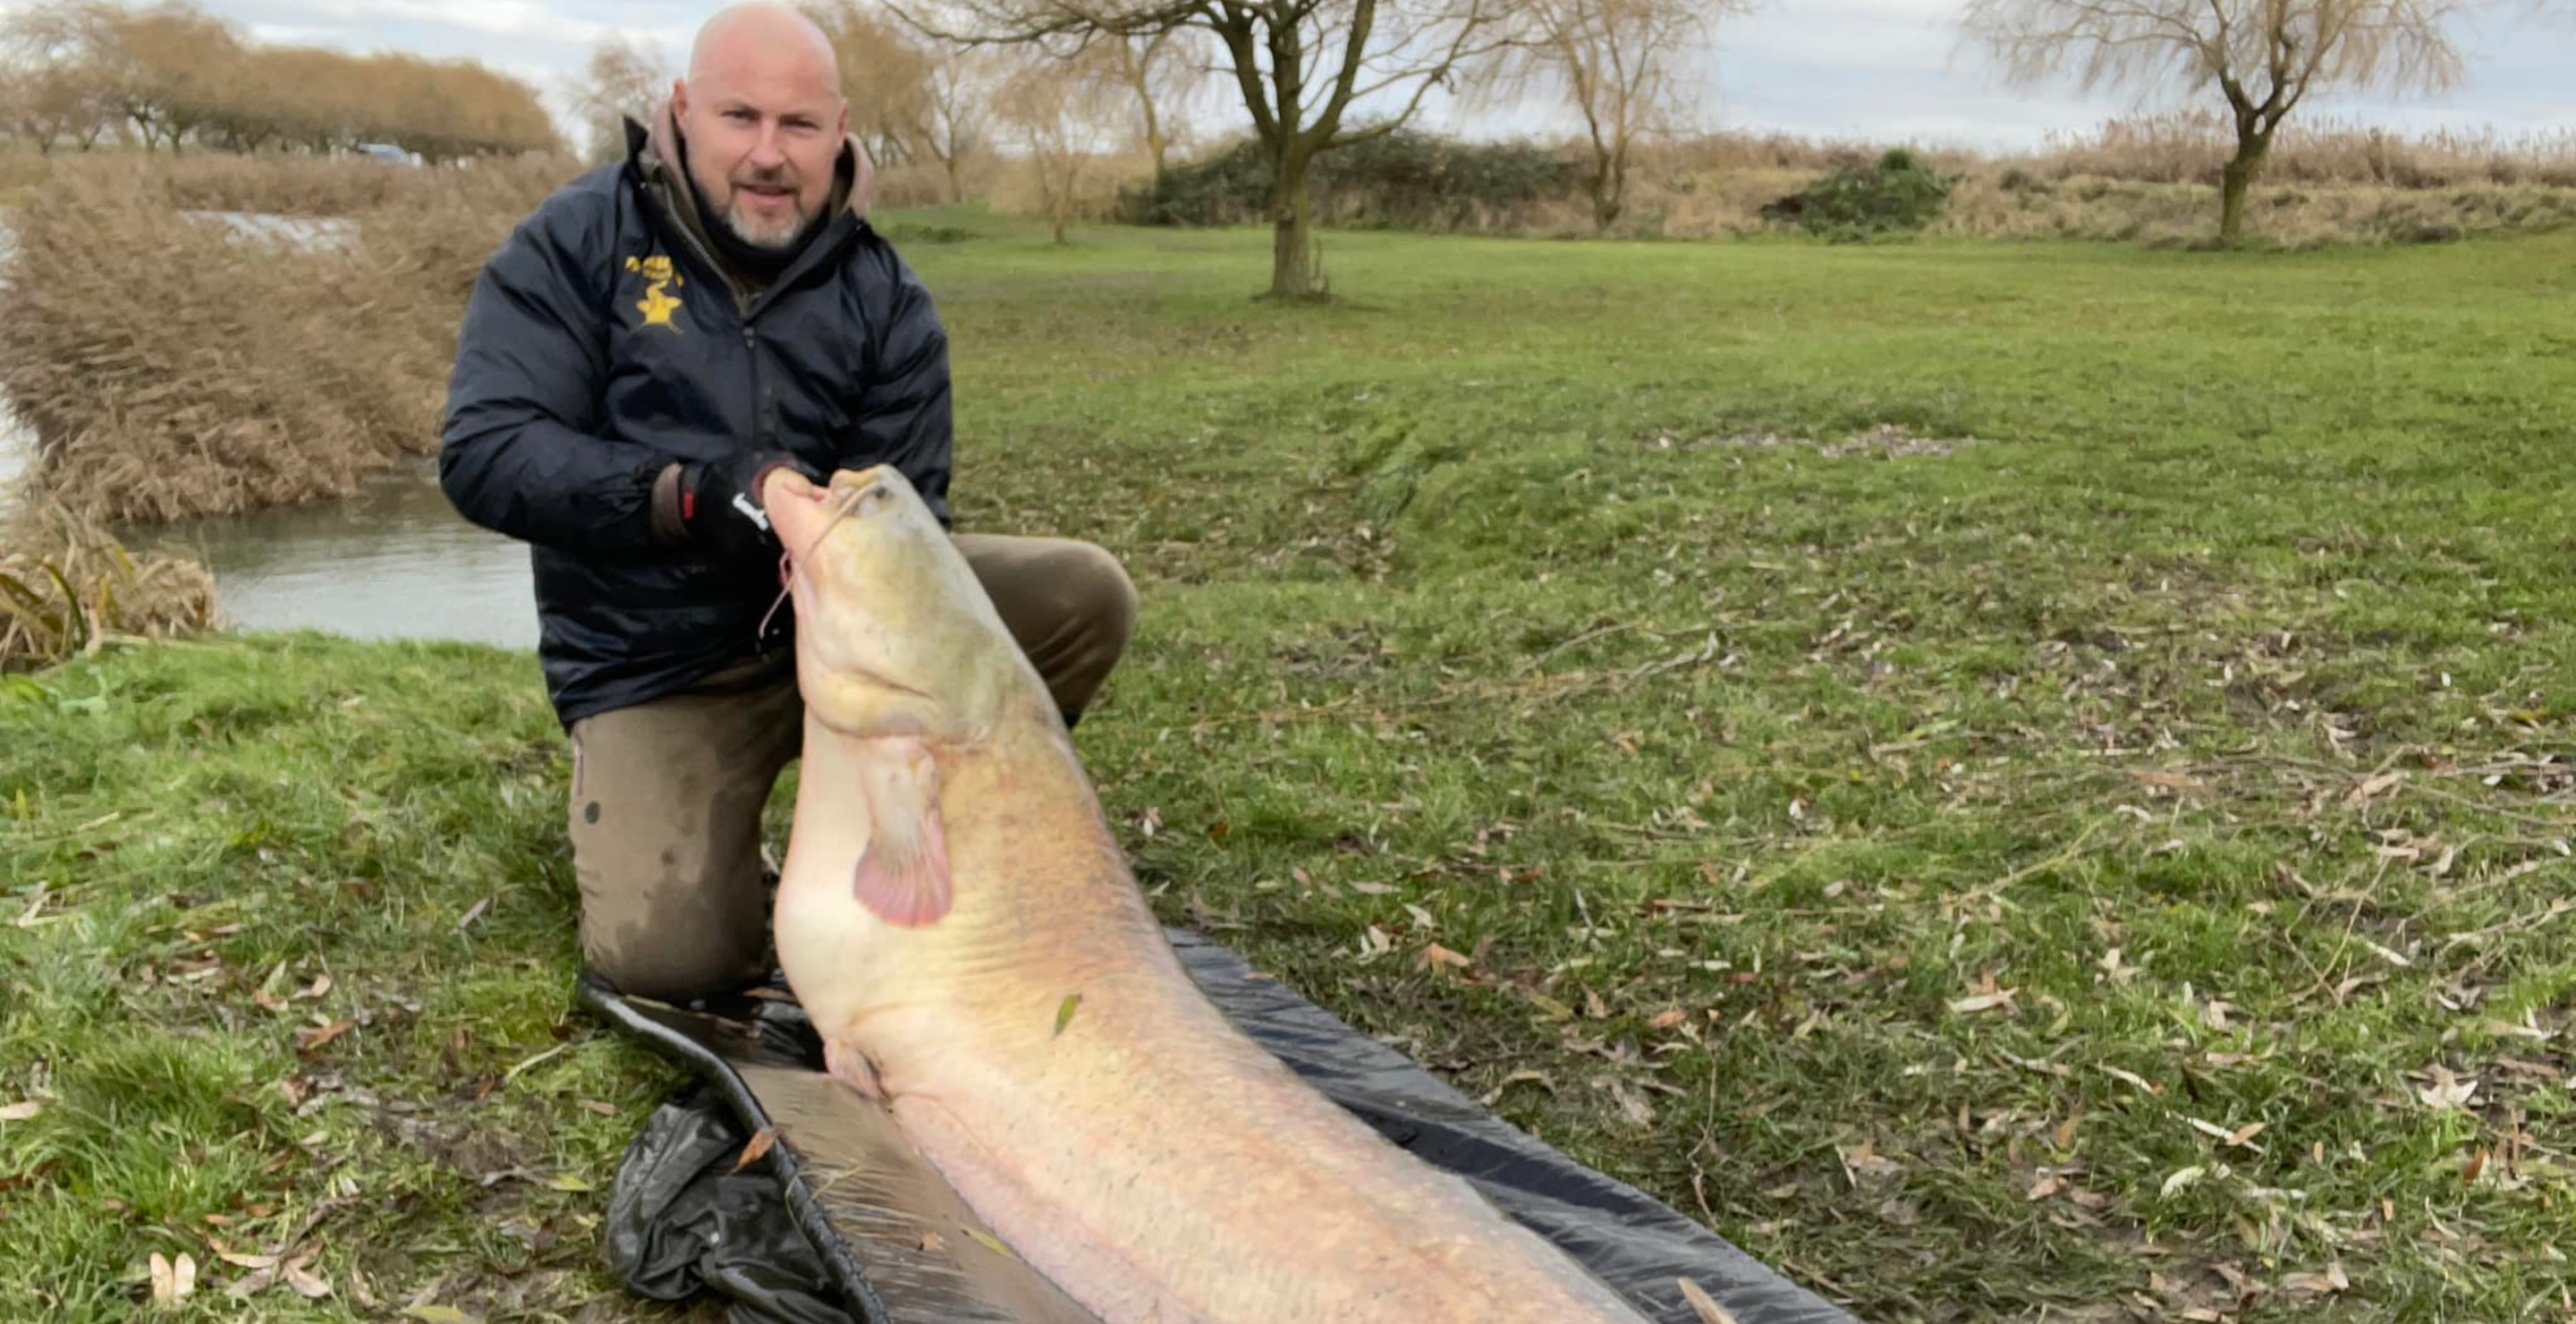 Angler Tosses Back Monster Catfish That Would Have Smashed Records